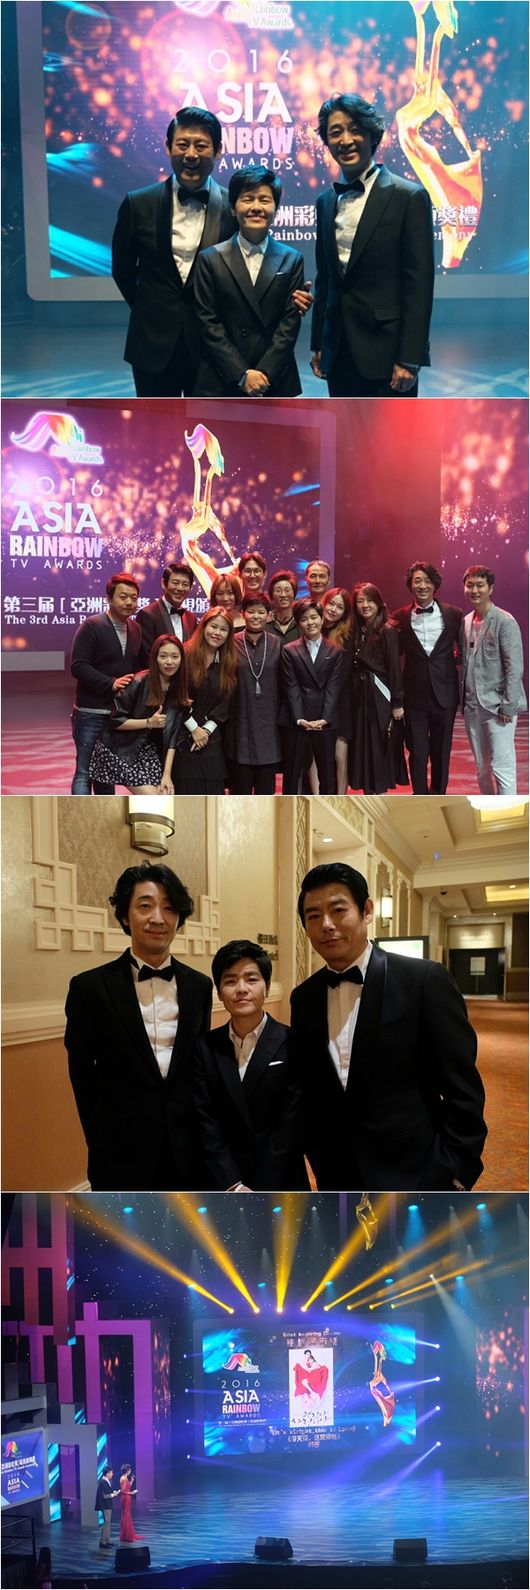 &quot;It's Okay, That's Love&quot; Wins 2 Awards at the Asia Rainbow TV Awards